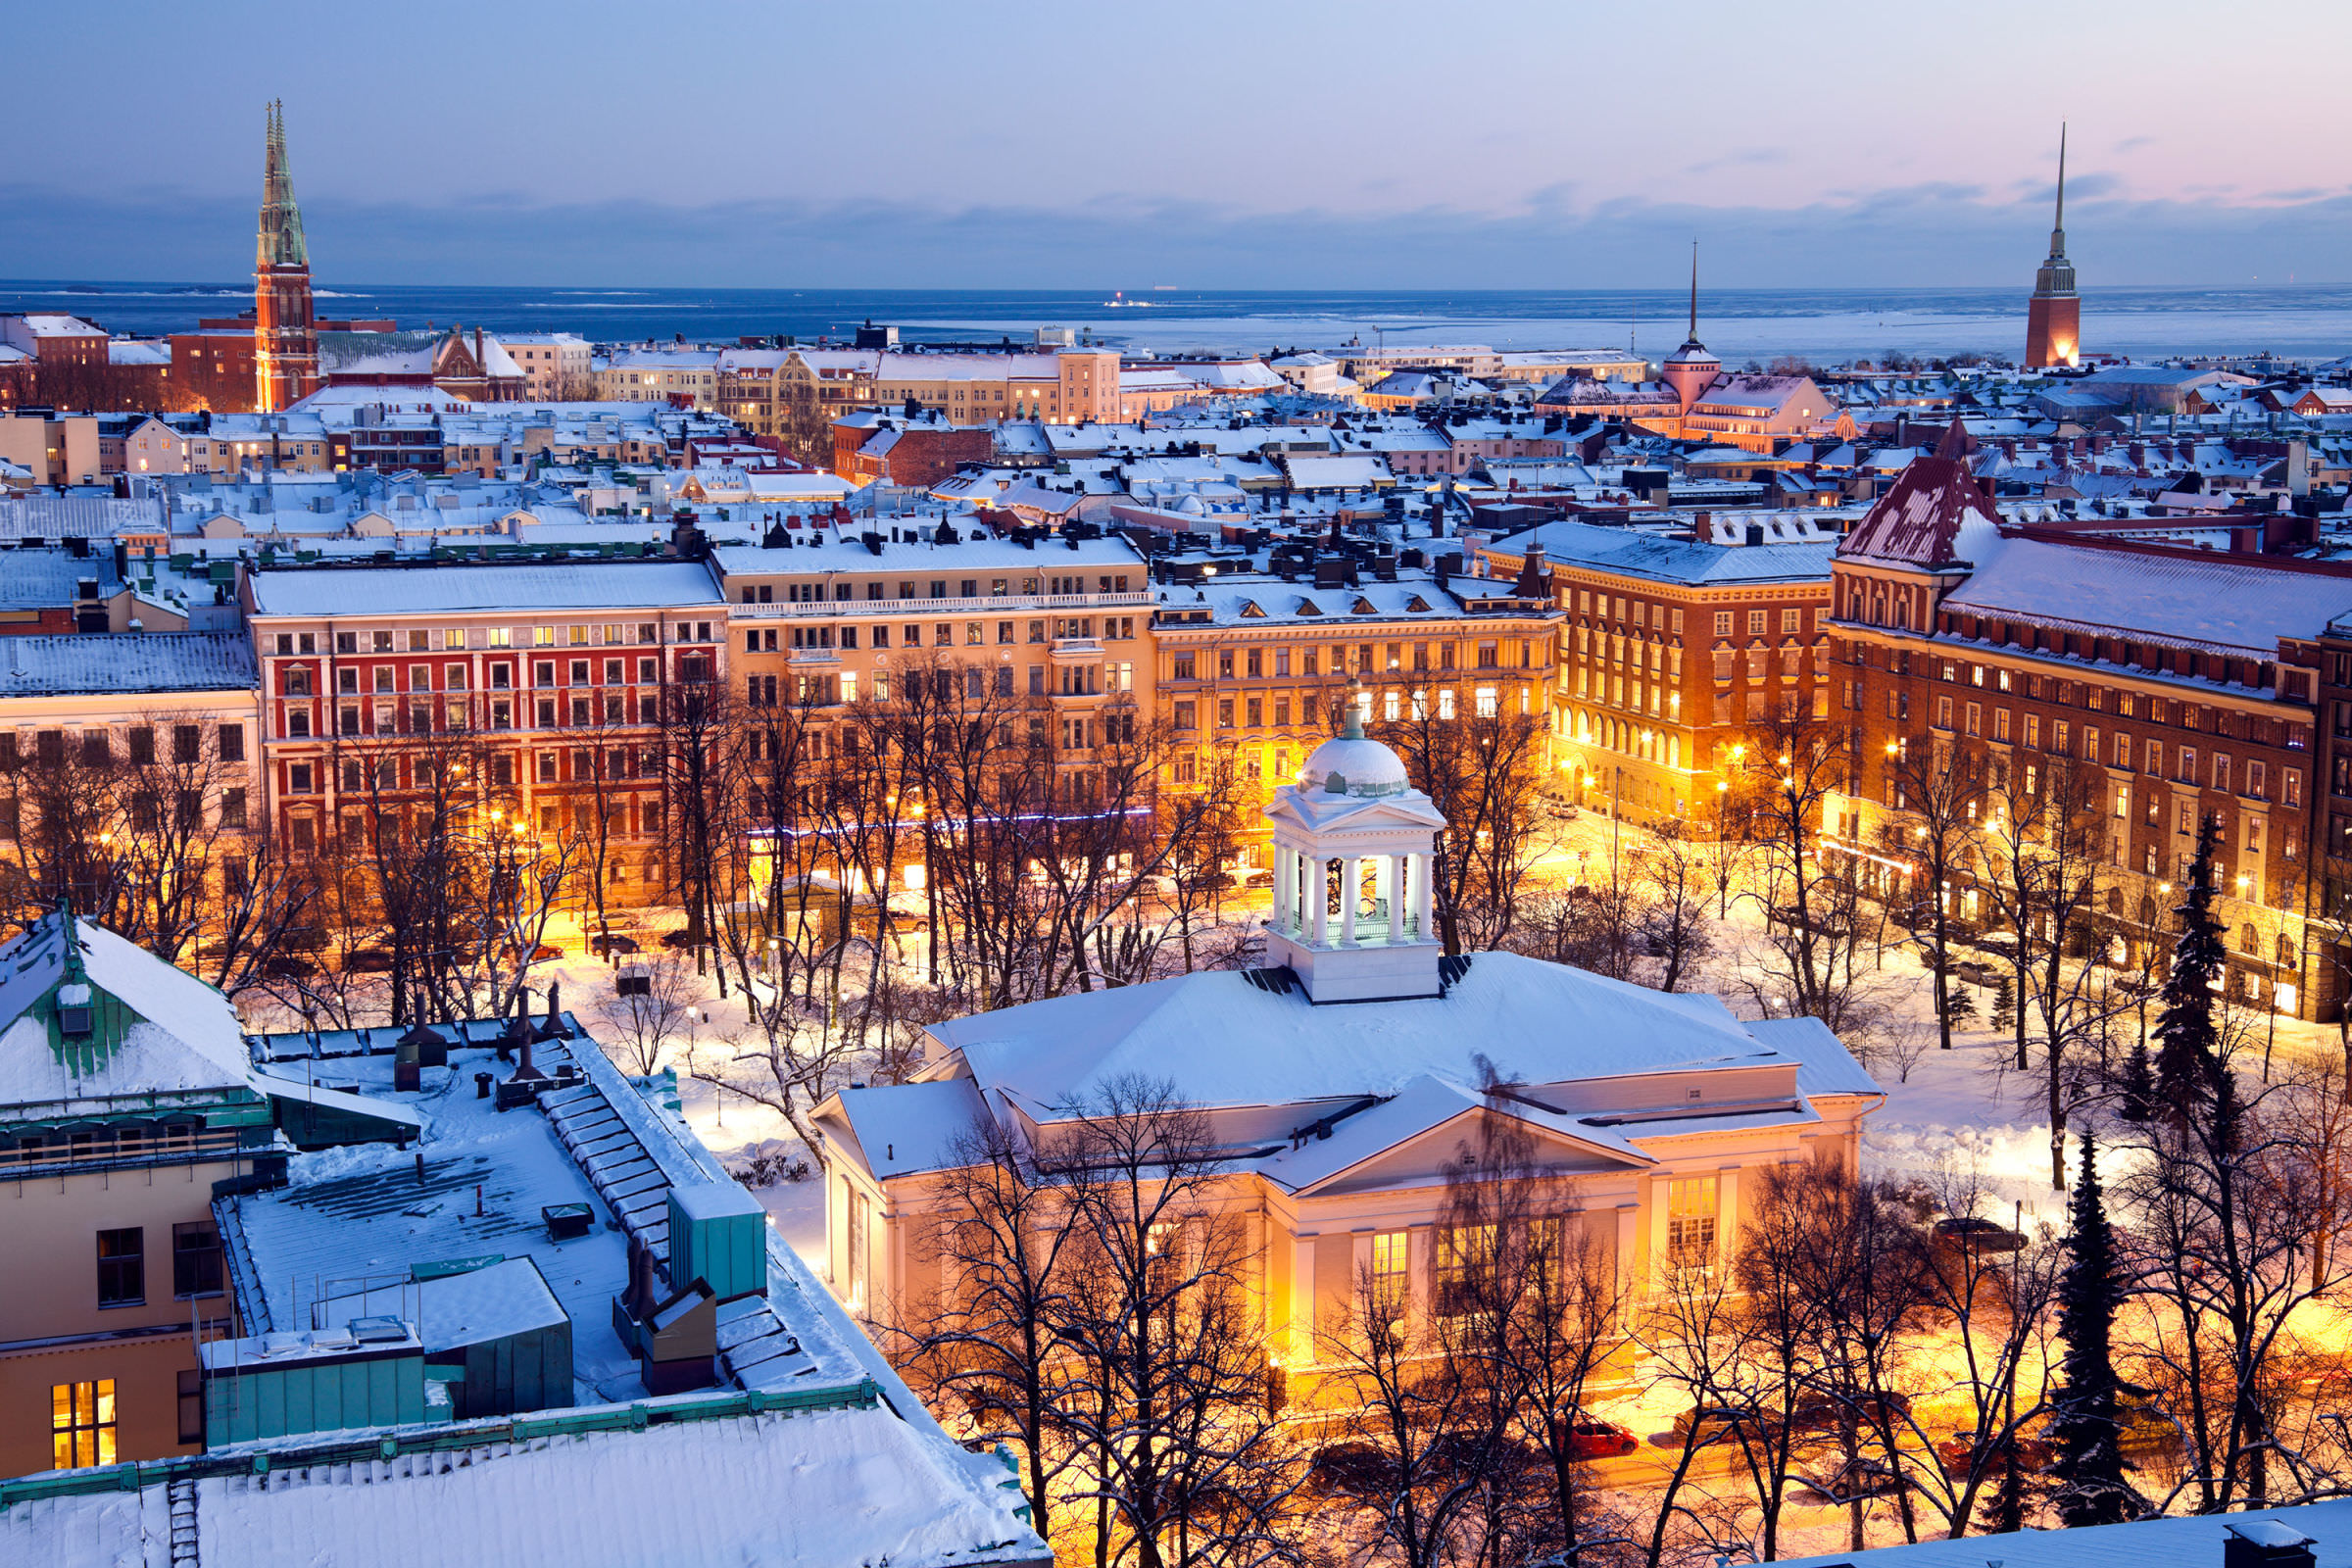 Explore the night life of Finland during your 10 nights stay